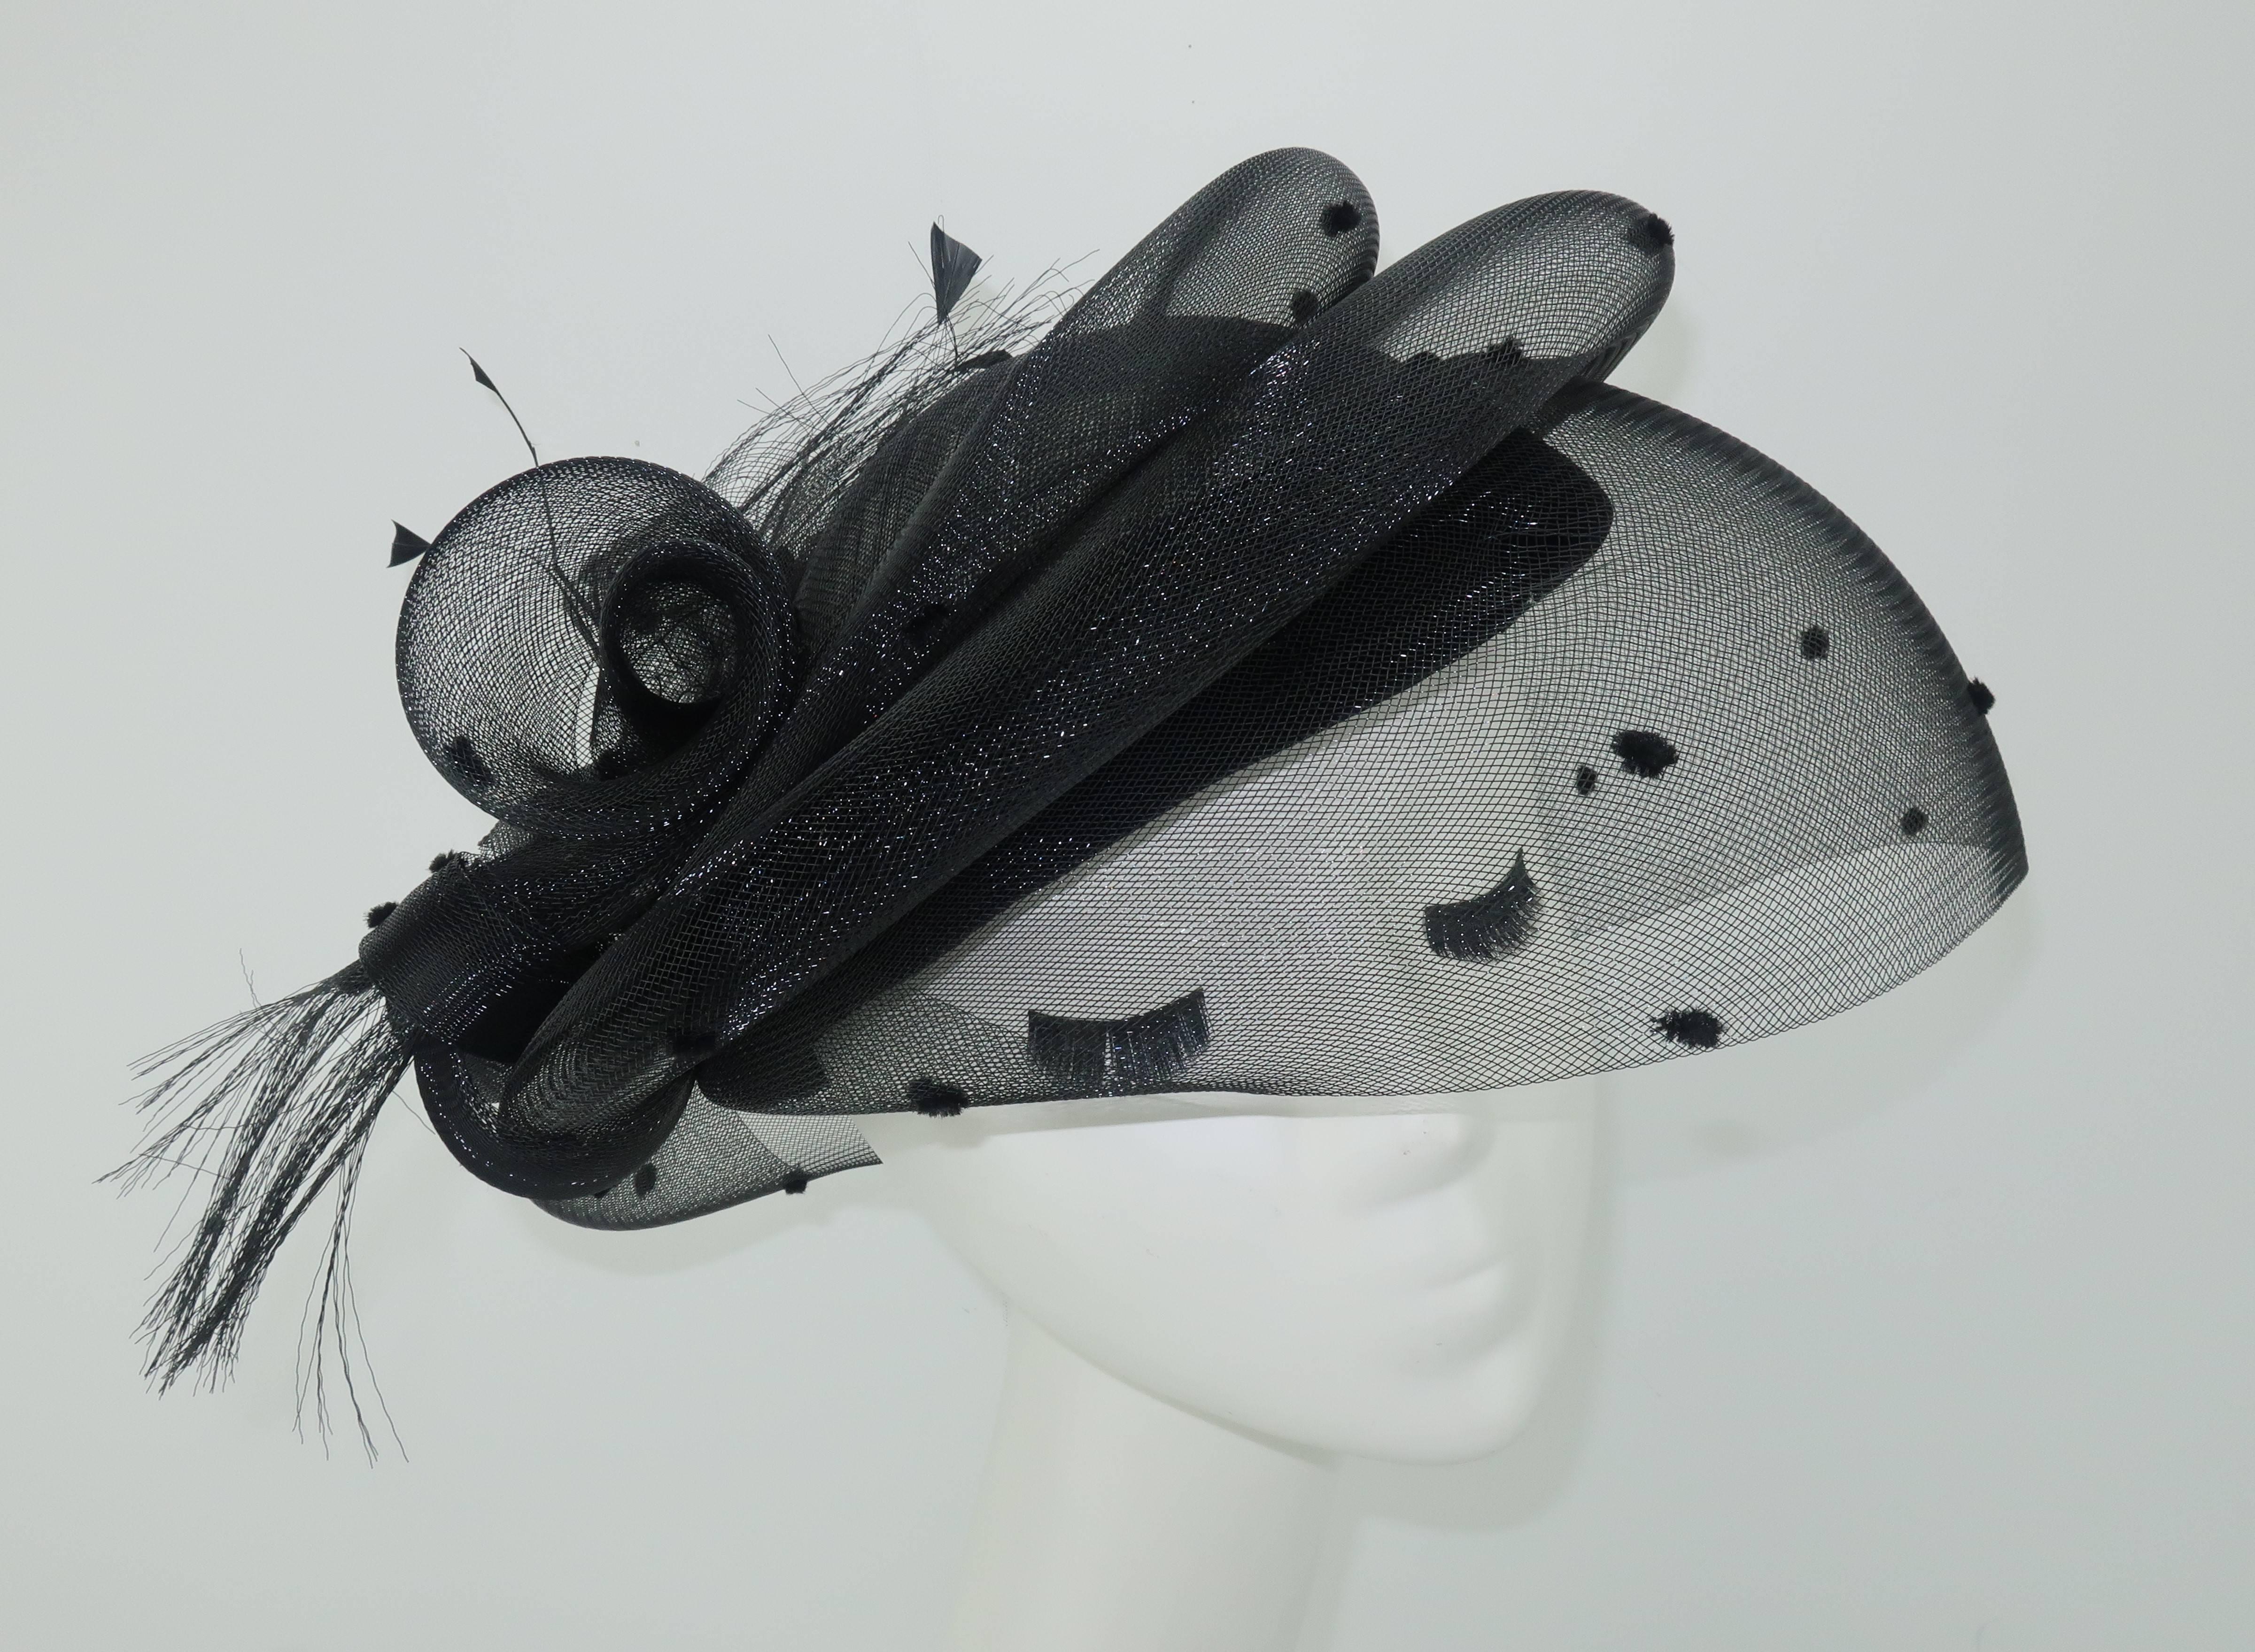 The Italian milliners, Marzi, have been creating hats since the 1920's ... adorning the heads of fashionable ladies with everything from daytime straw creations to elegant formal toppers.  This sculptural sensation is of the latter style with a